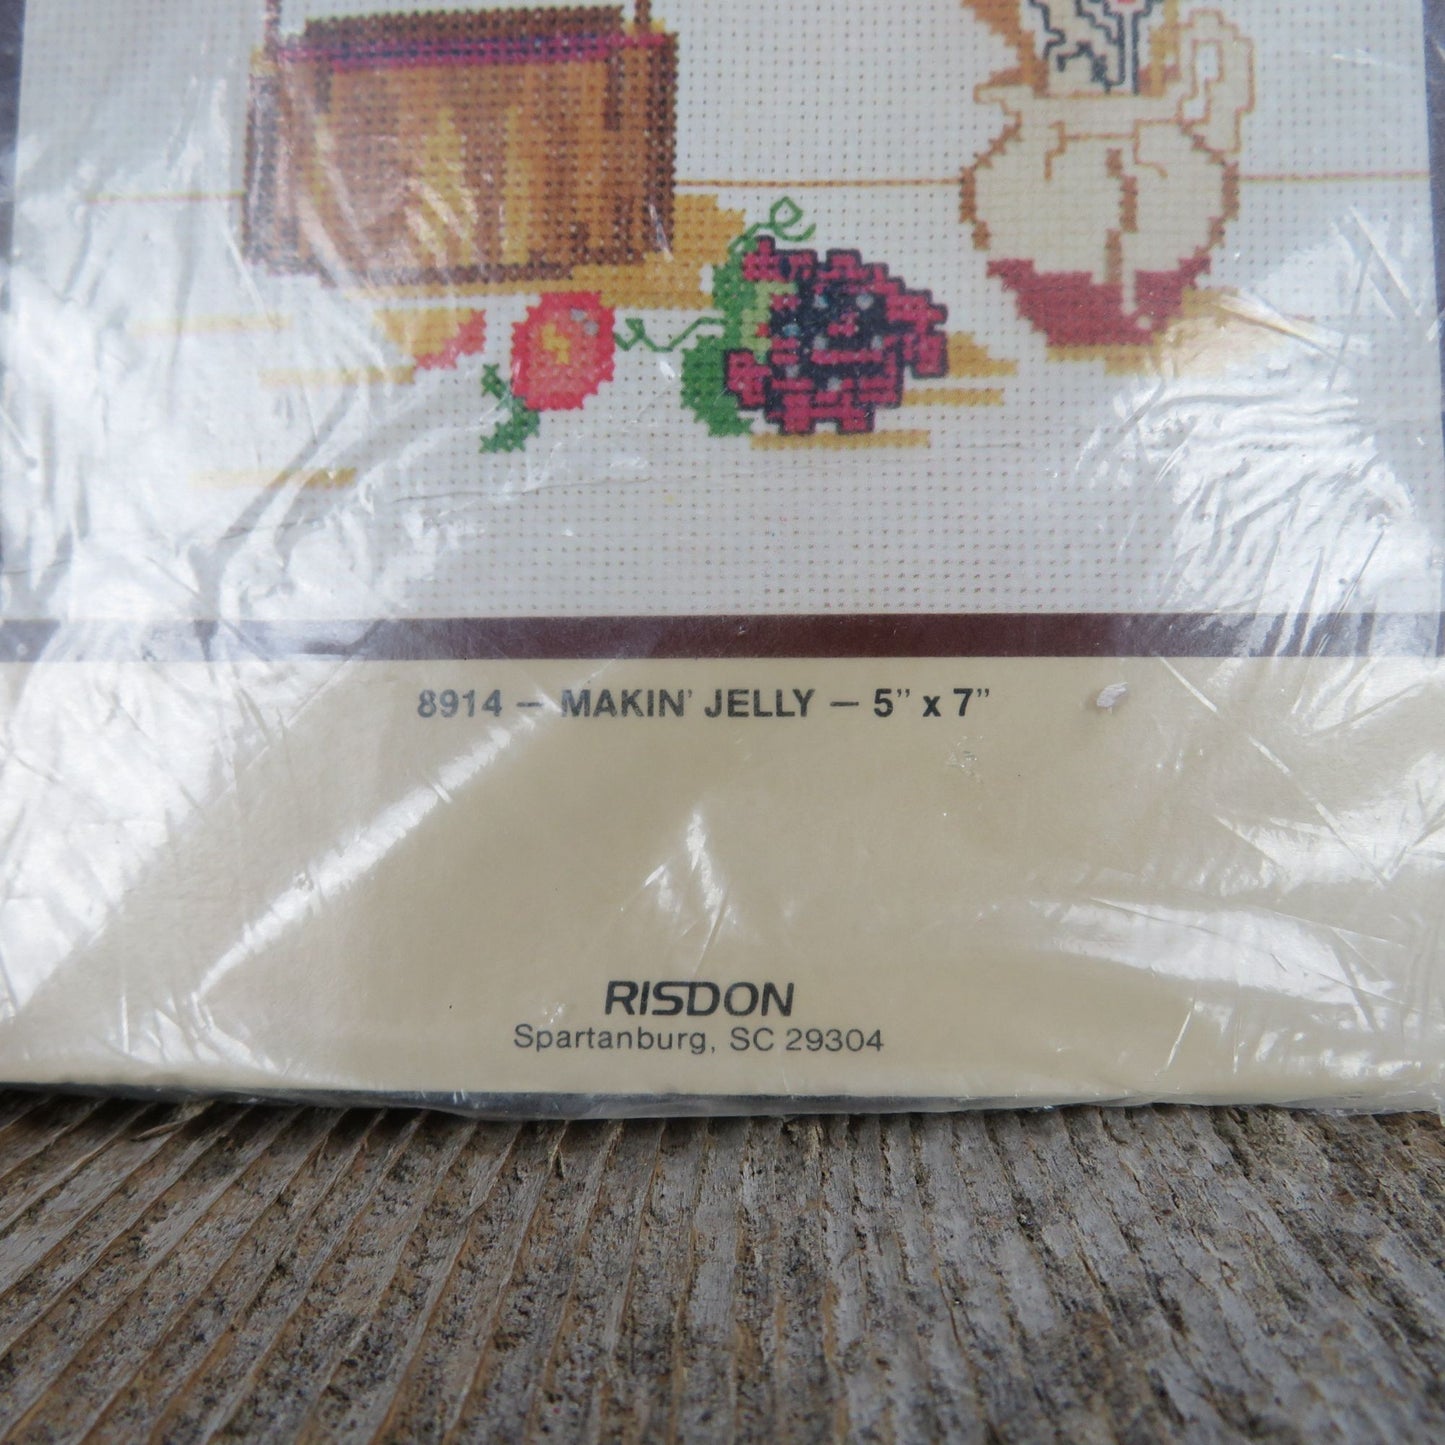 Vintage Counted Cross Stitch Kit Making Jelly Kitchen Art Dritz 1983 House Warming 8914